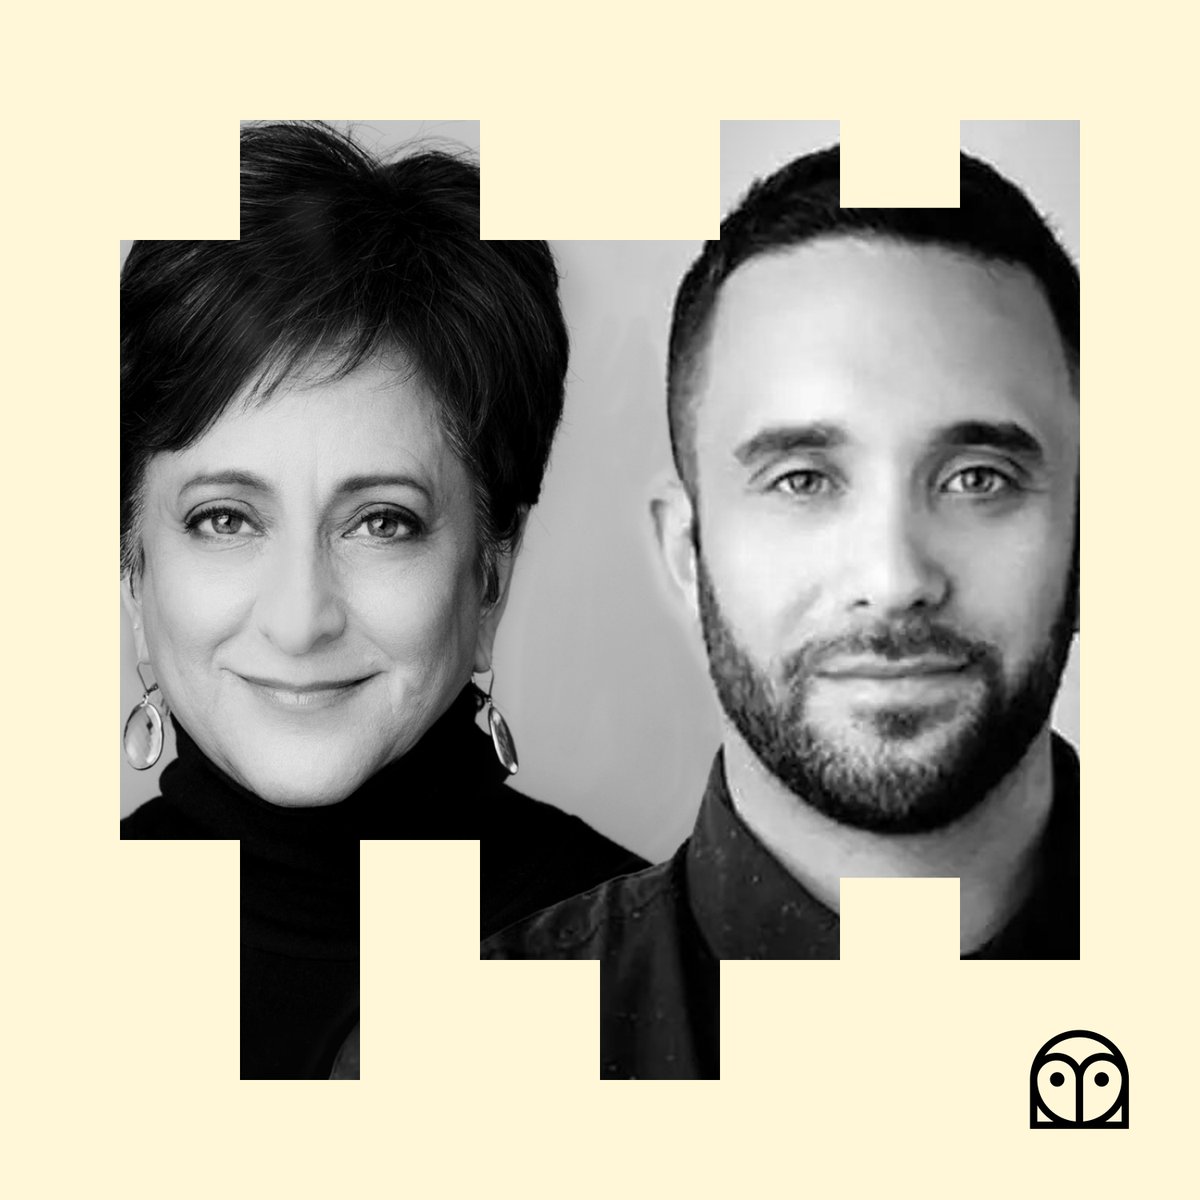 In the new season of the Design Better Podcast, Judy and Daniel of @wertandcompany share practical guidance about how to navigate #techlayoffs and what you *should* be doing to land your next role. Listen: designbetter.co/podcast/judy-a… Sponsored by @makeitfable. #designjobs